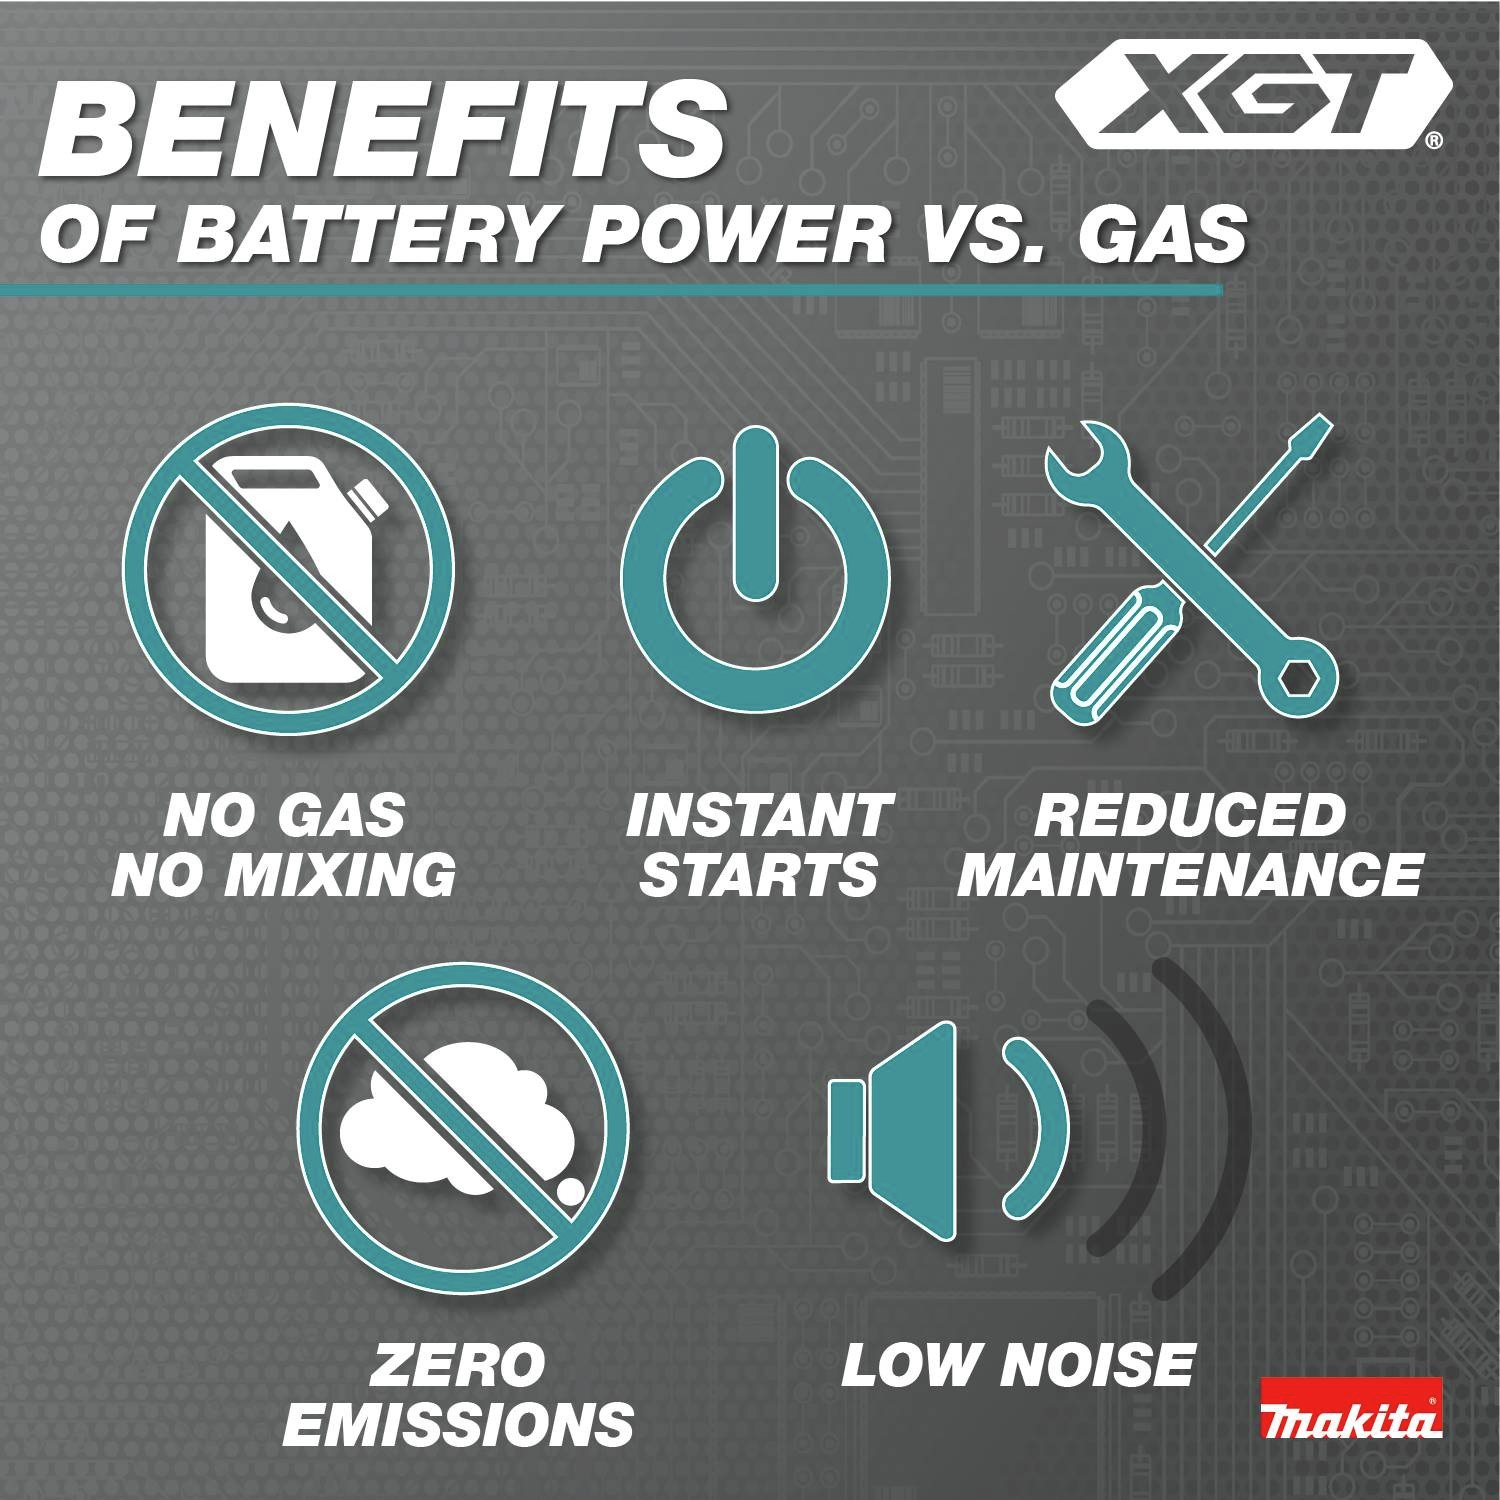 Benefits of Battery Power vs. Gas